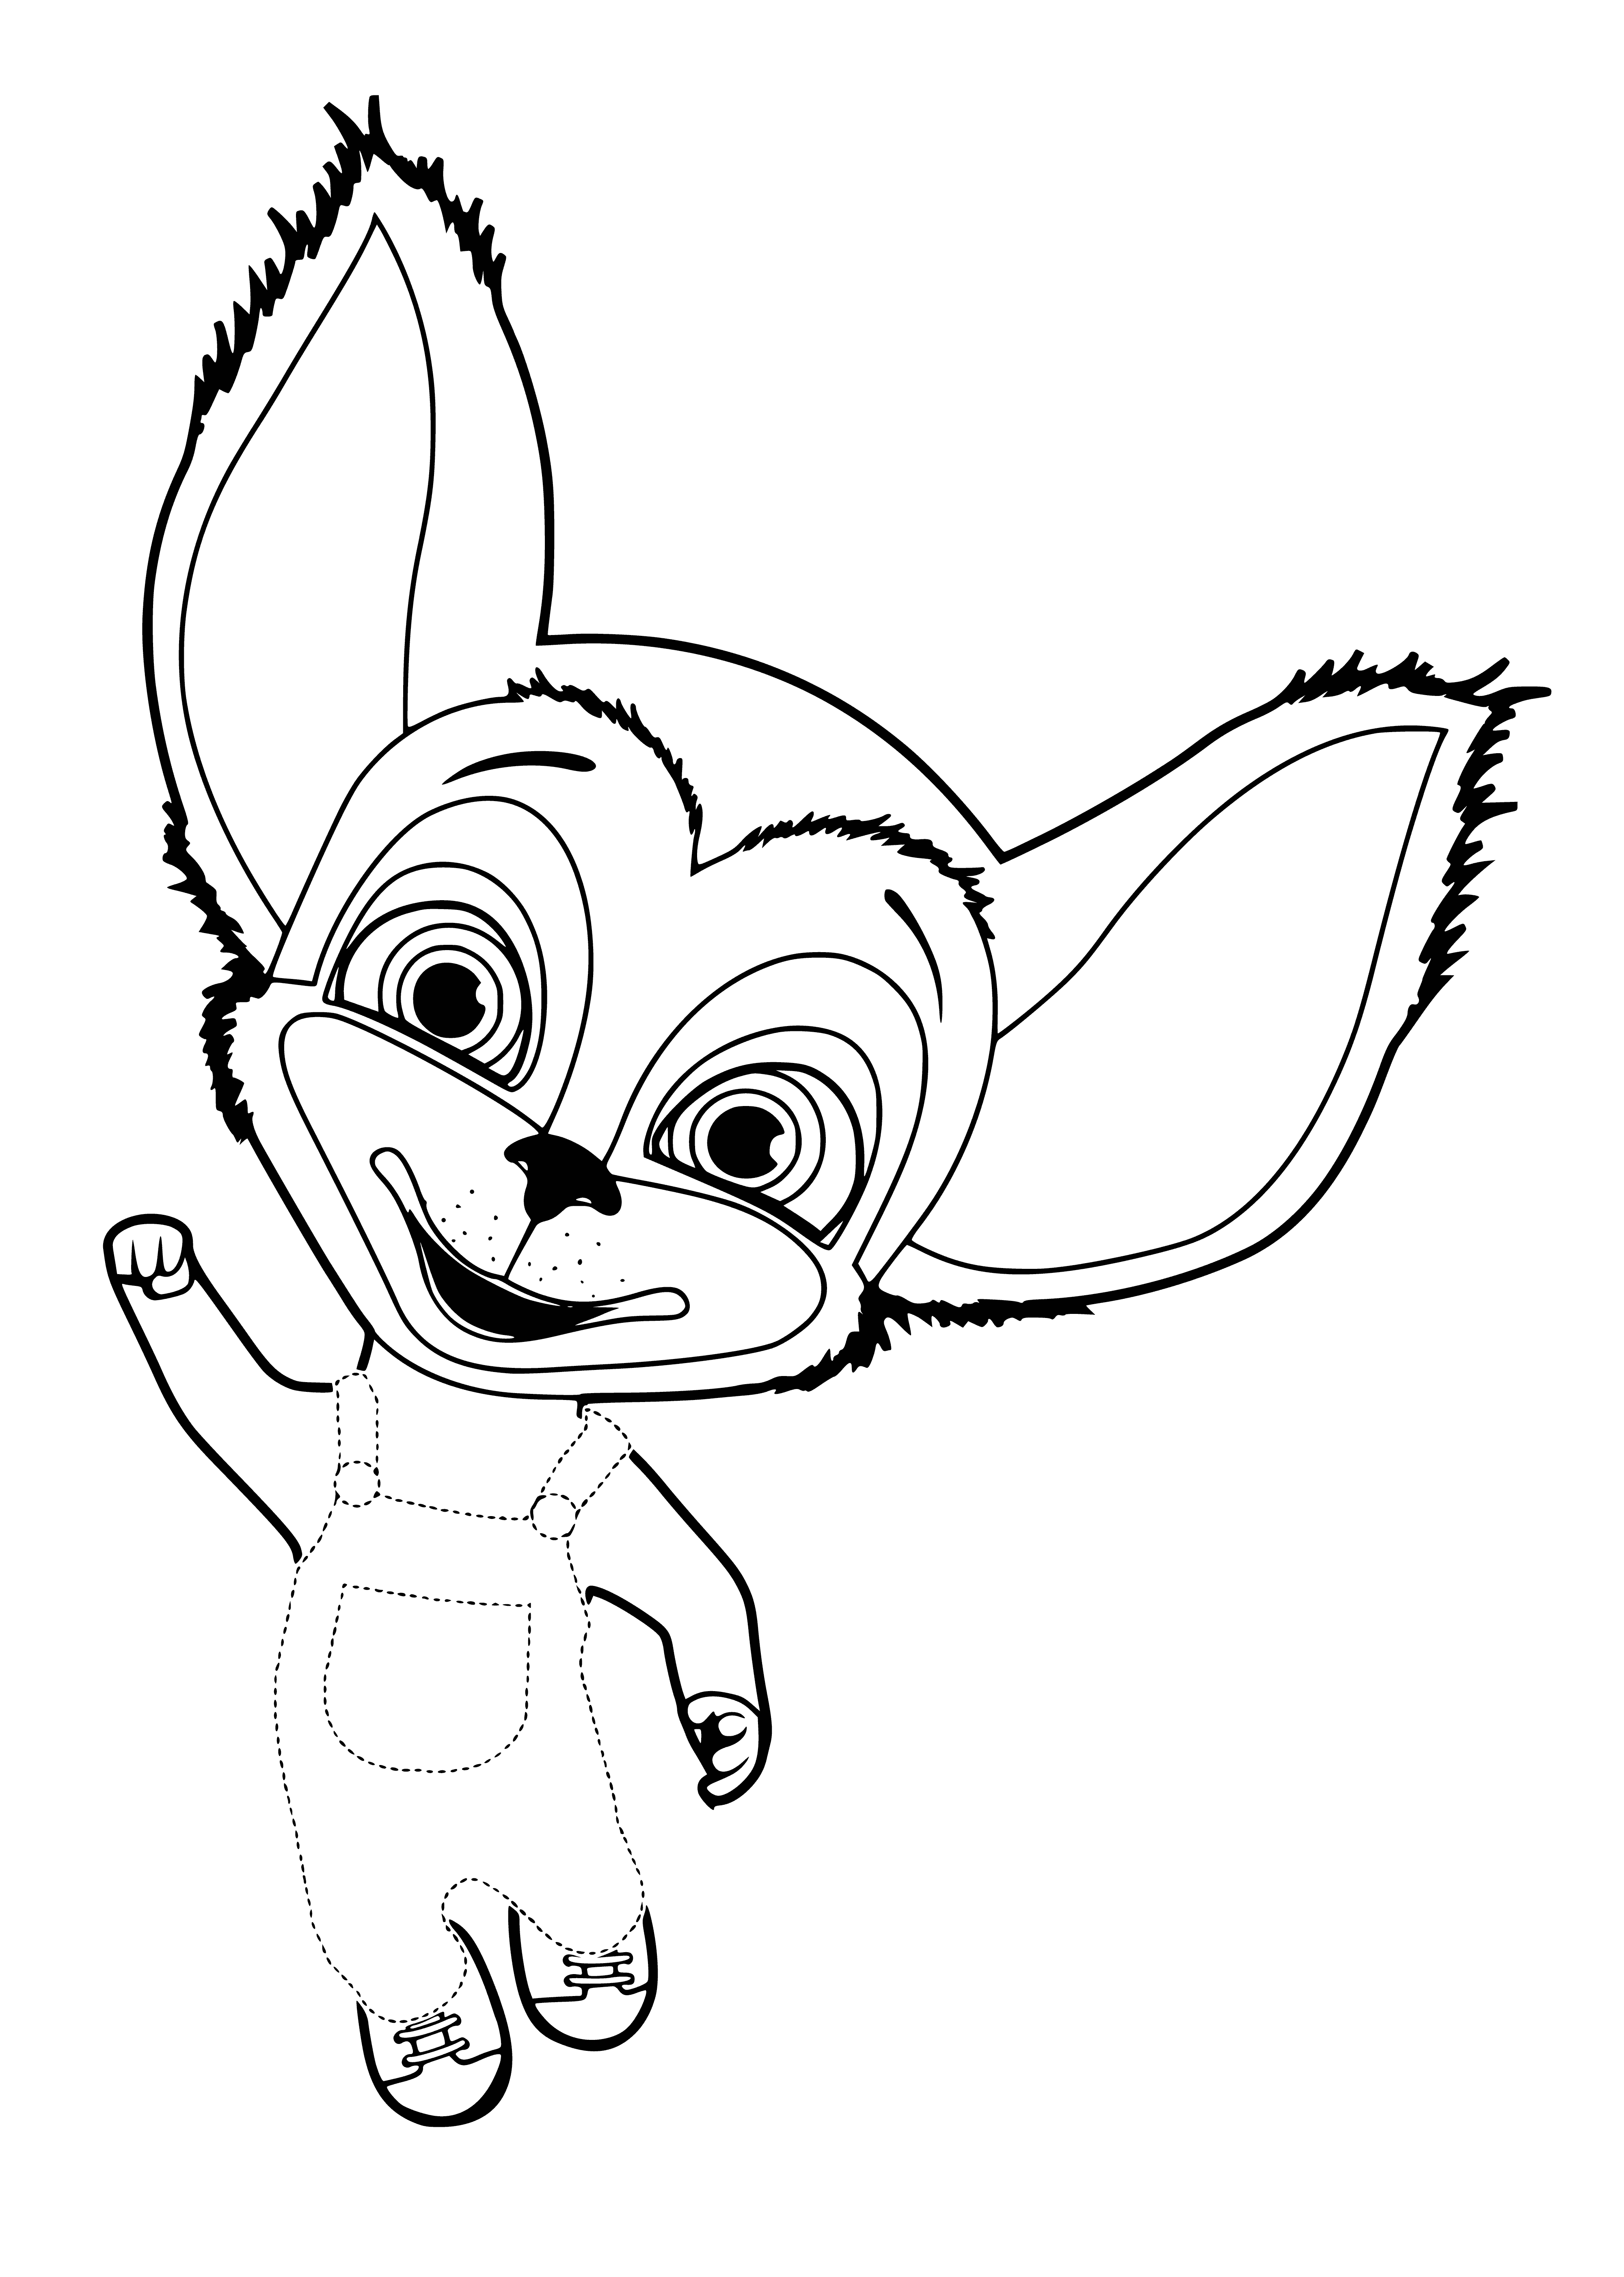 coloring page: A small baby with light brown hair lays in a white crib, sucking its thumb.